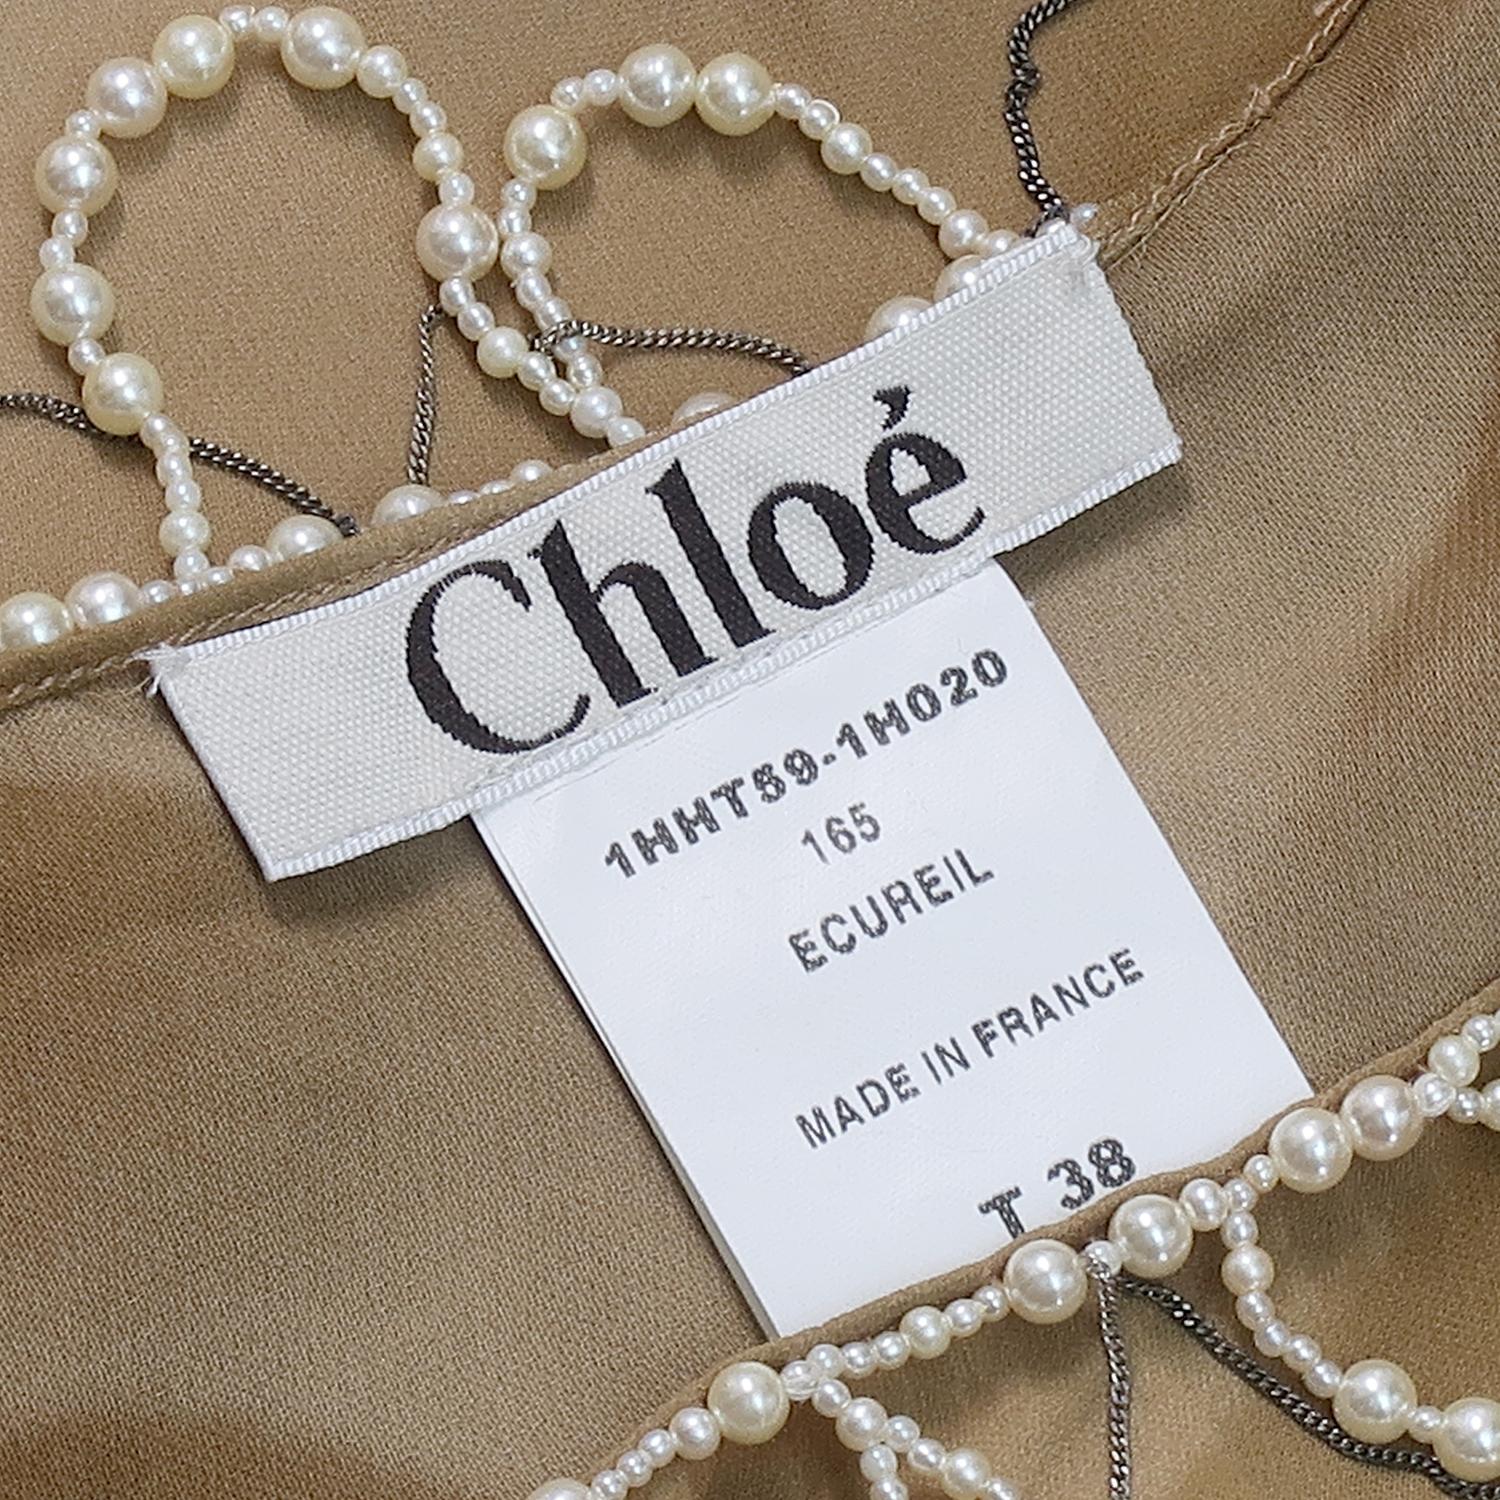 Chloé by Stella McCartney FW-2001 Silk Ombré Pearl Trim Evening Top In Excellent Condition For Sale In Brussels, BE